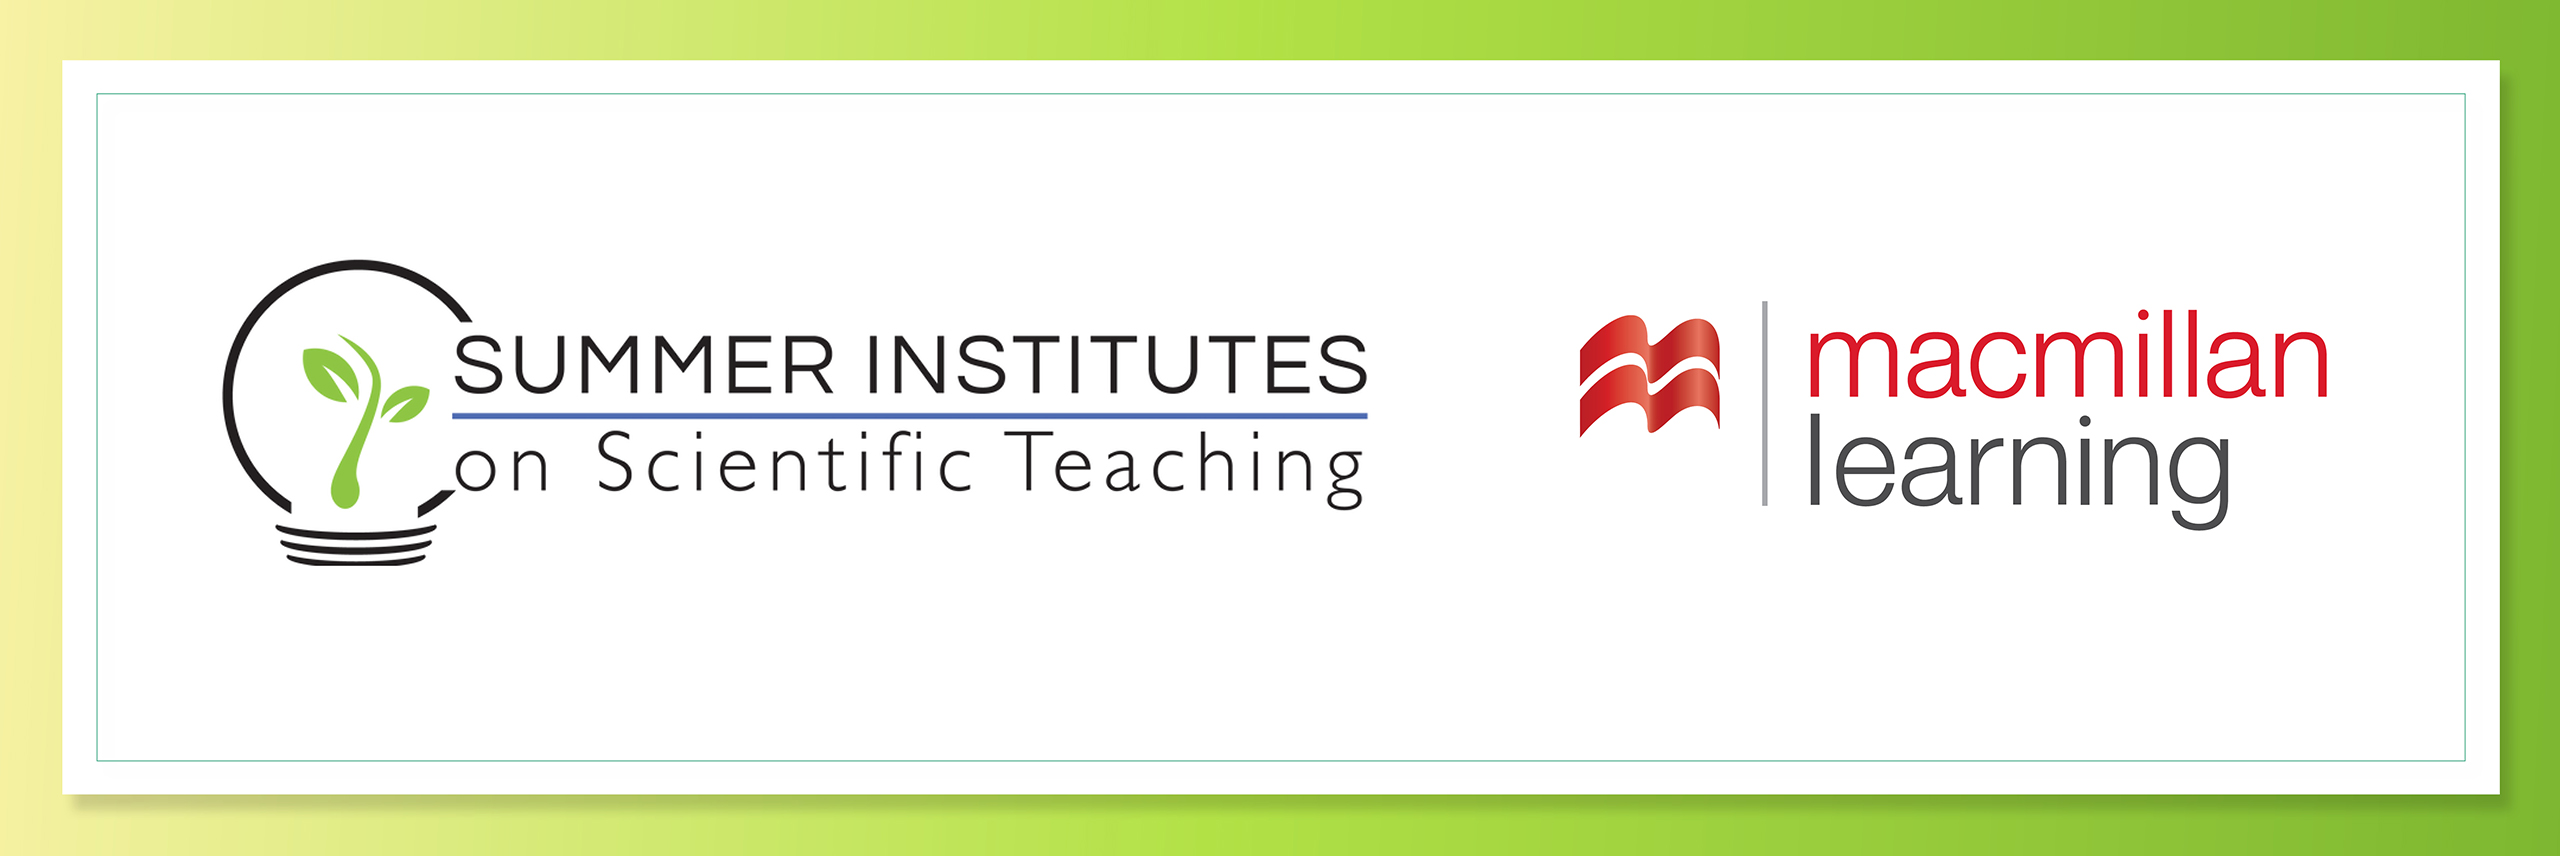 A Webinar Co-Sponsored by Summer Institutes on Scientific Teaching and Macmillan Learning